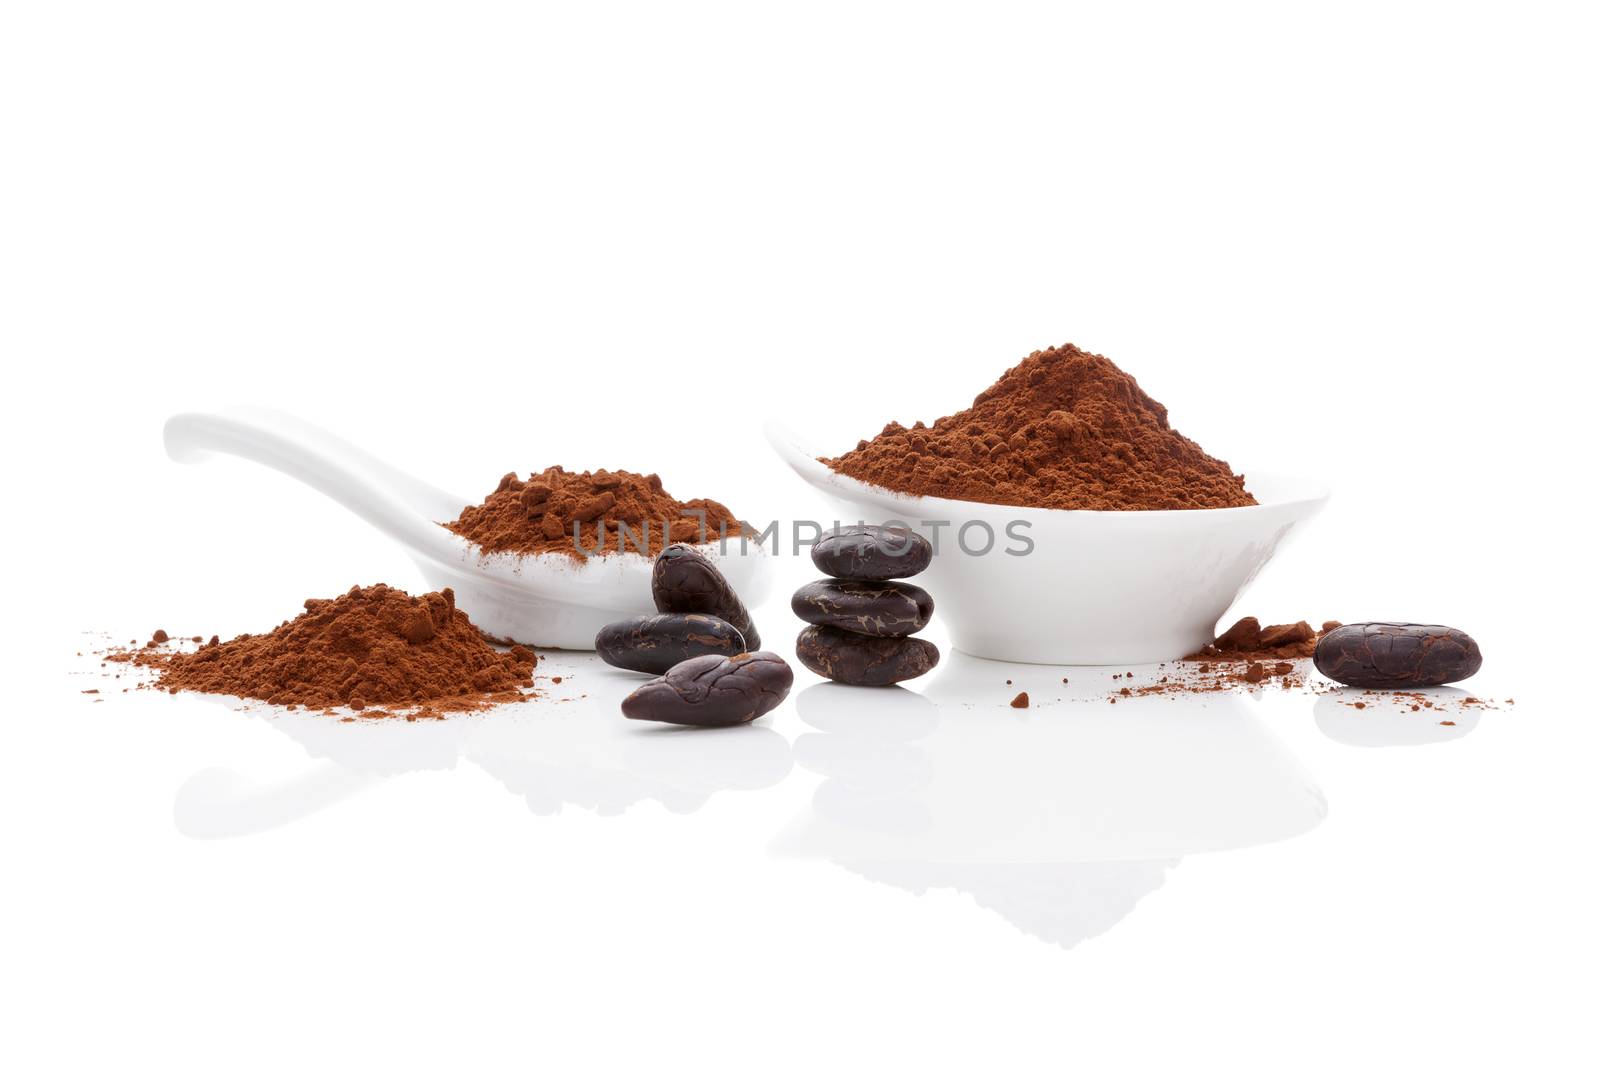 Cocoa beans and cocoa powder in white bowl and white spoon on white background. Healthy superfood.